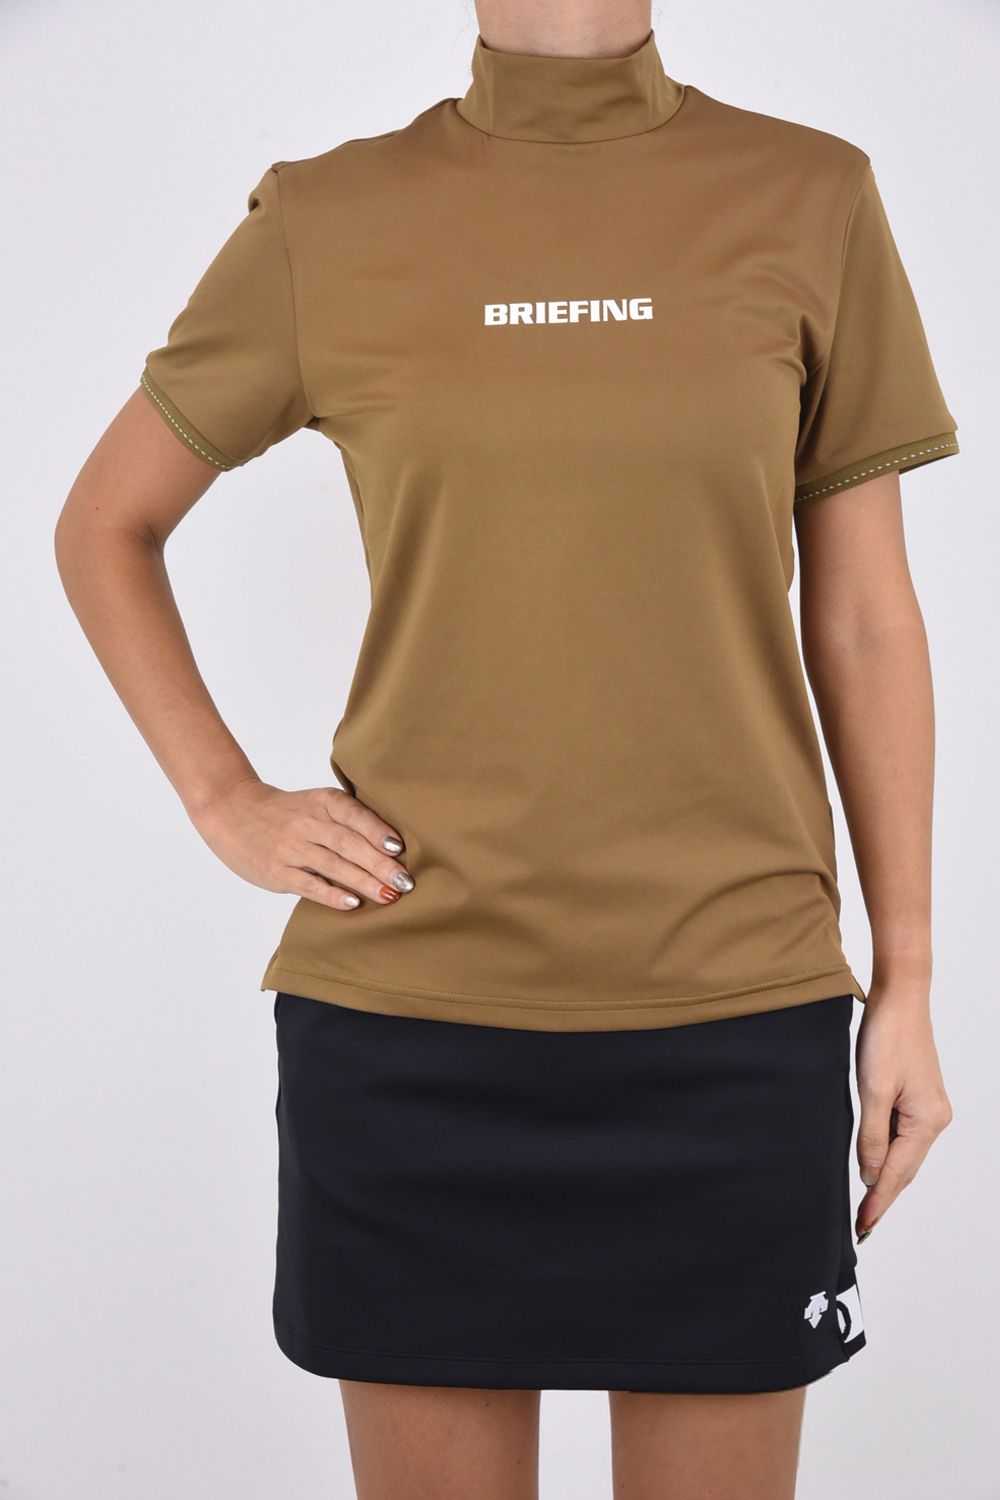 BRIEFING - WOMENS TOUR HIGH NECK / BRIEFINGロゴ ハイネックシャツ